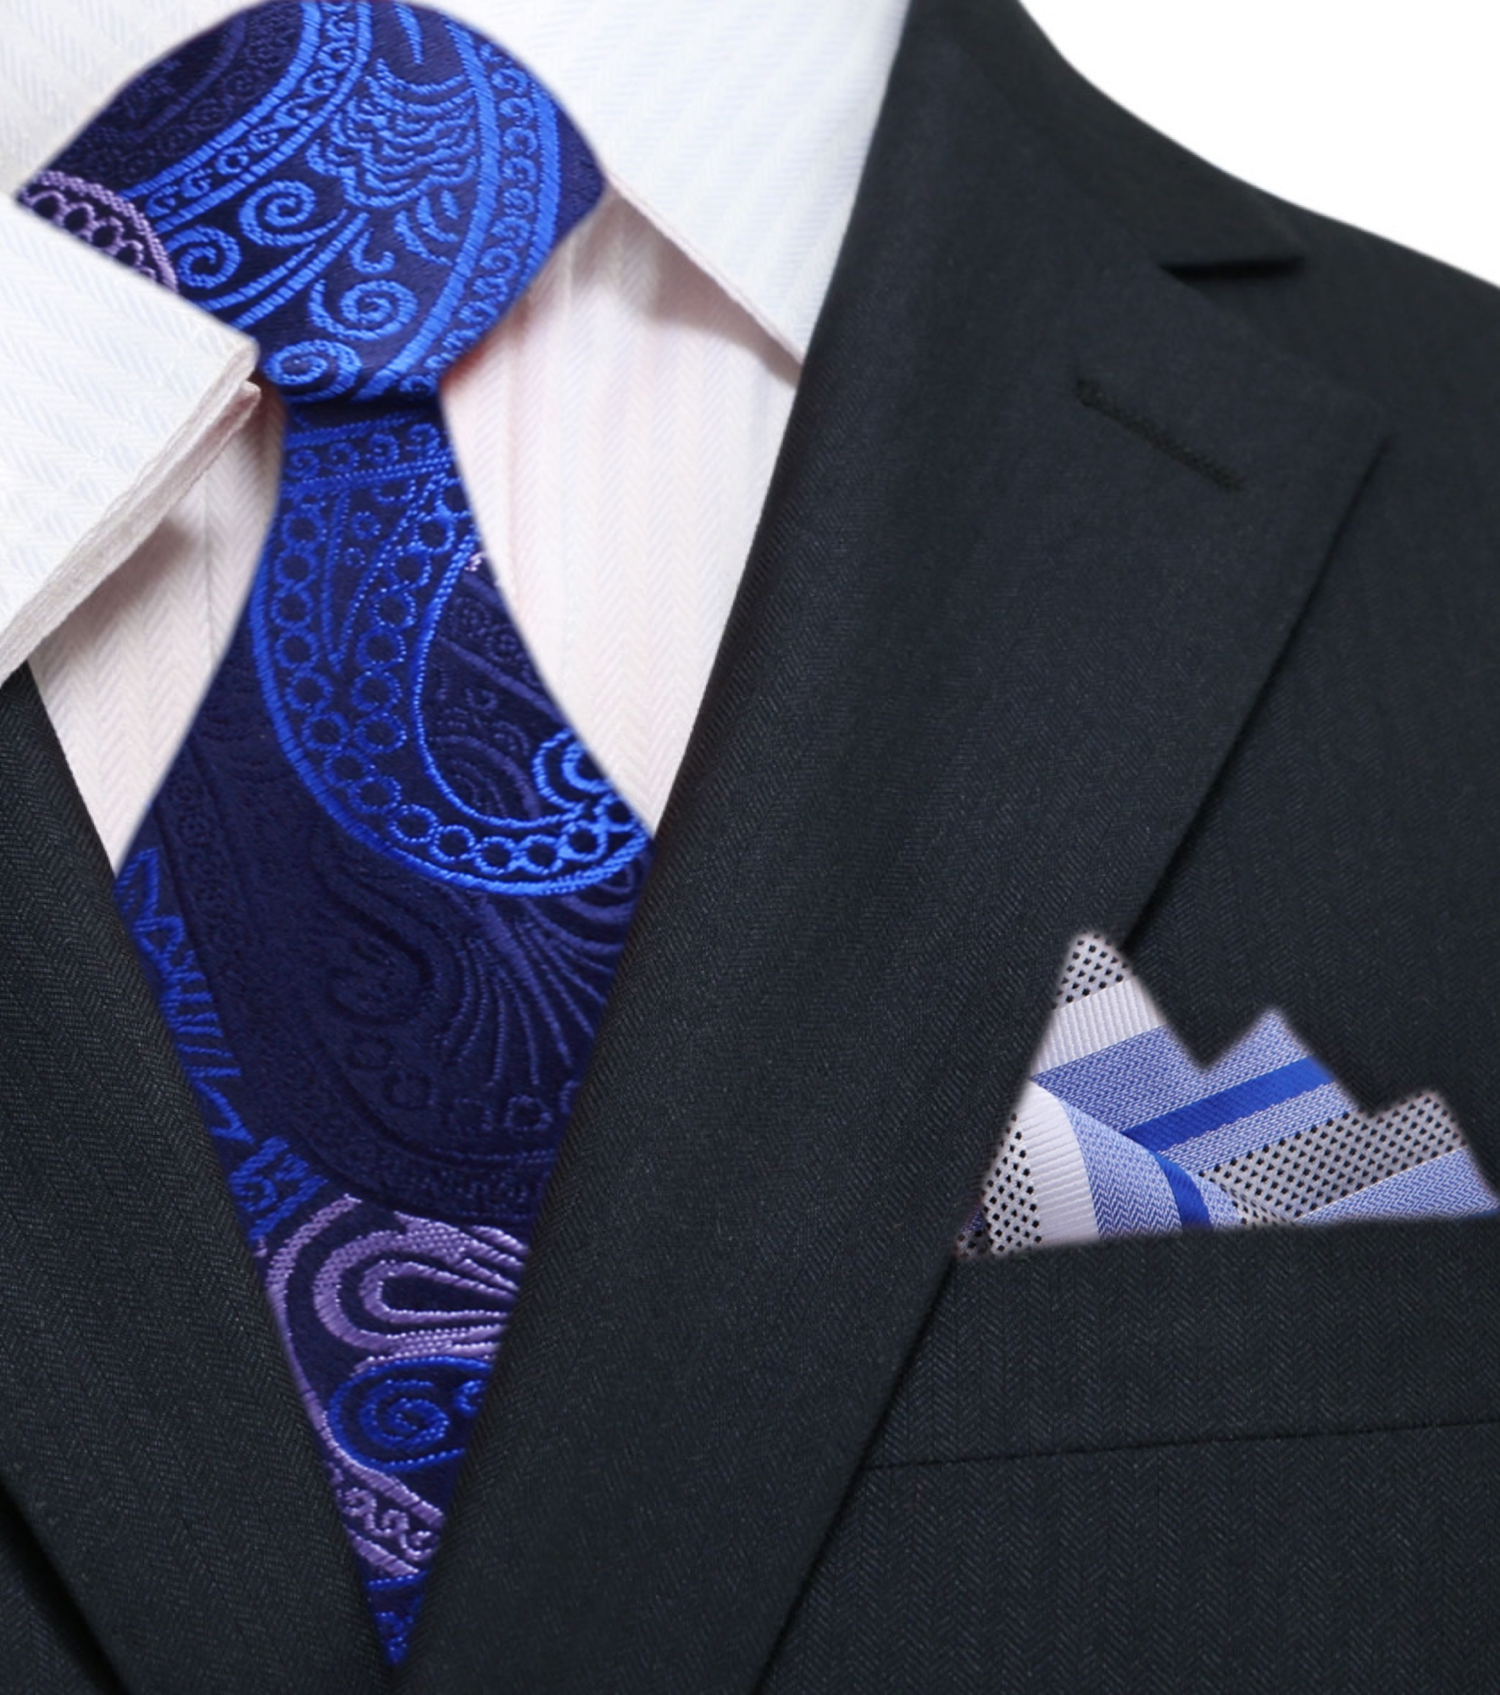 Main: Shades of Blue and White Paisley Necktie and White, Blue Stripe Square